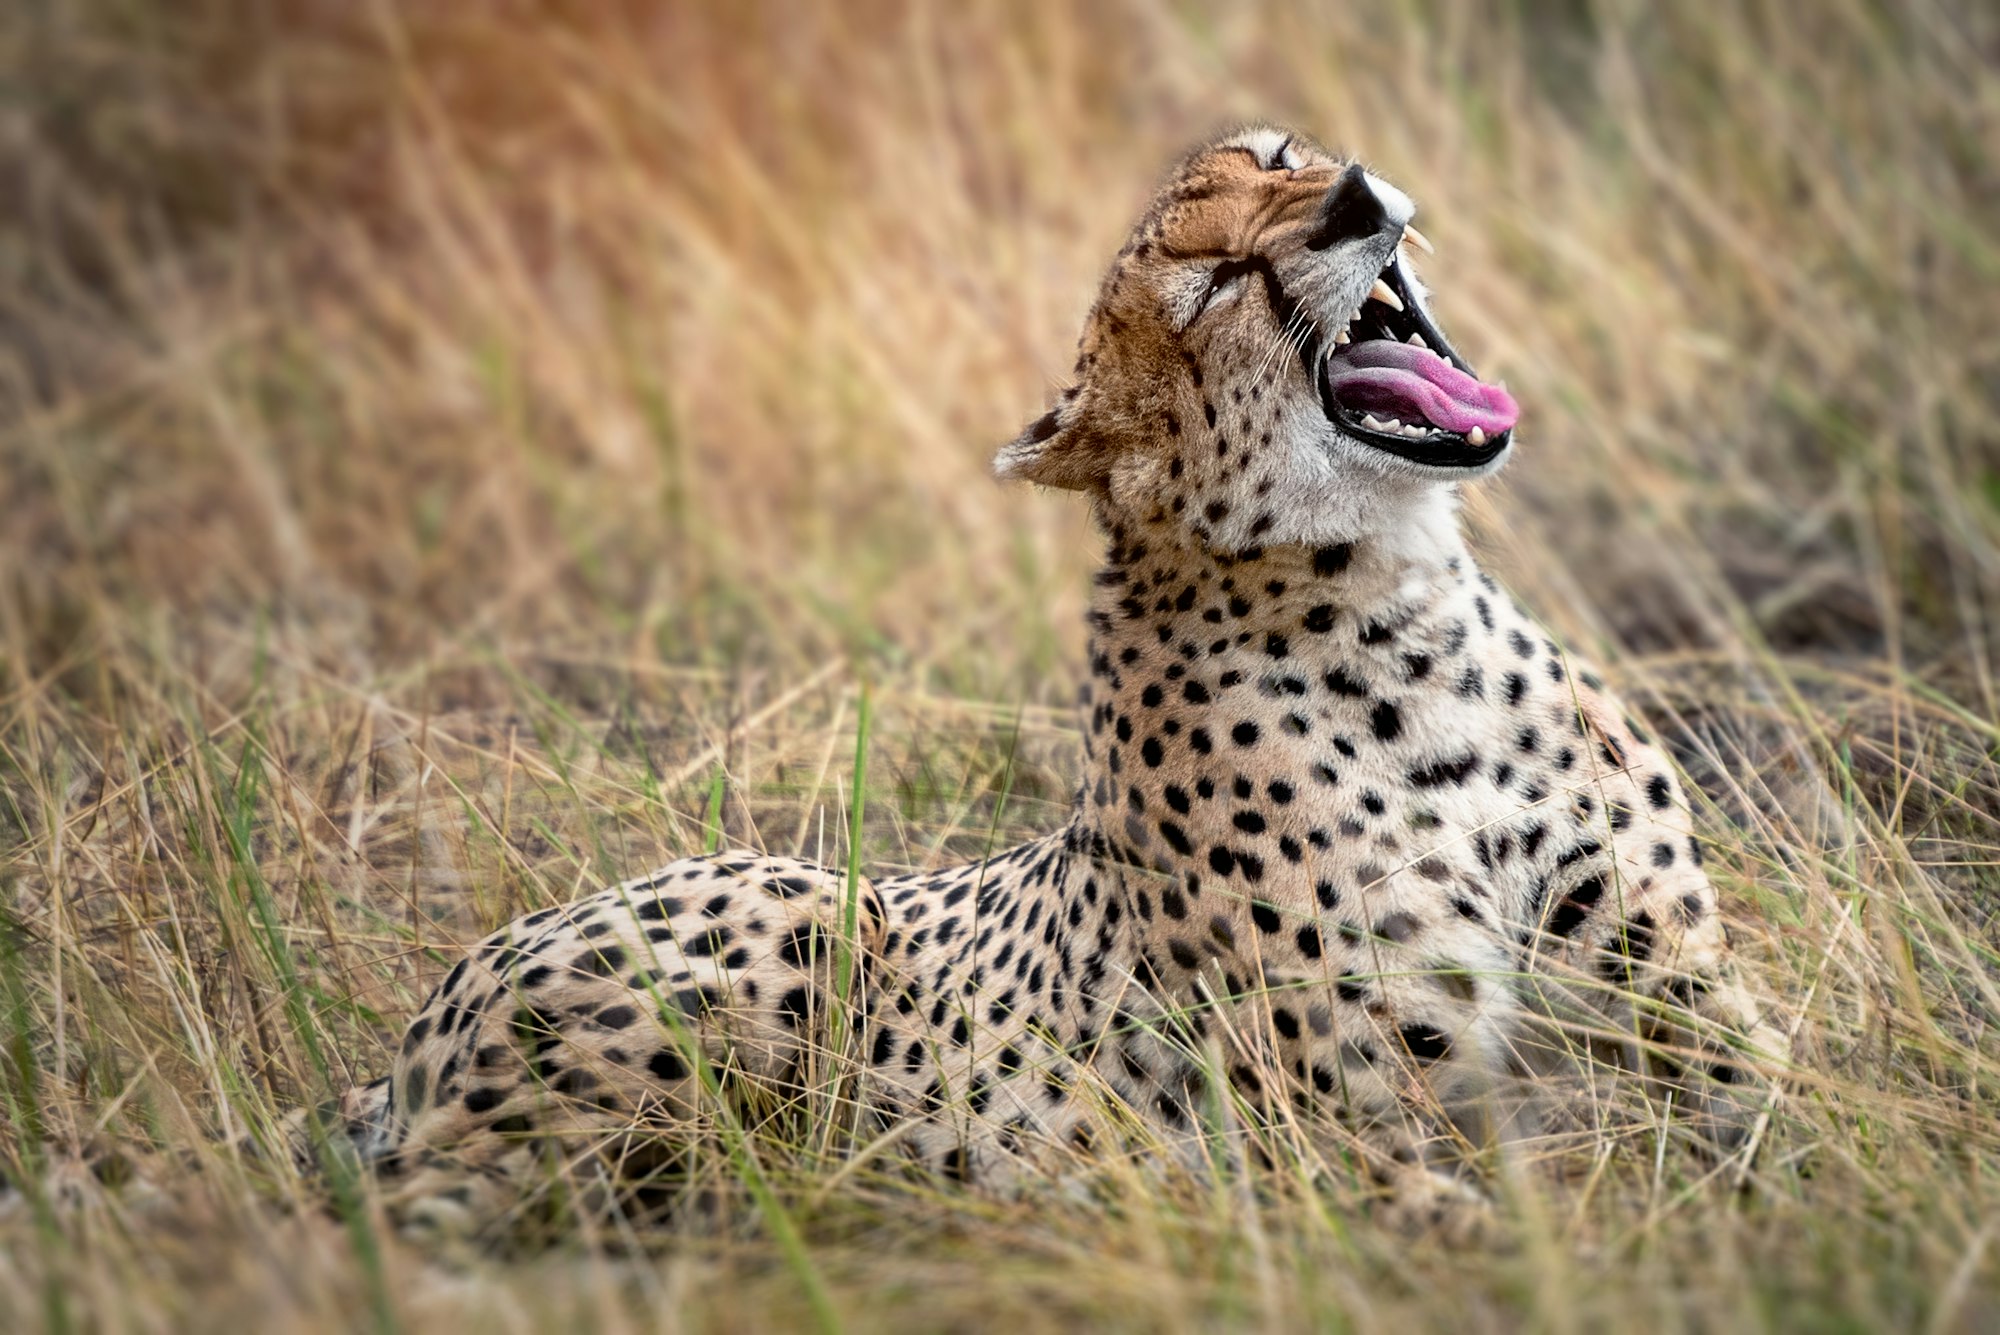 Indian Oil Corporation to give INR 50 crore for Cheetah relocation from Africa